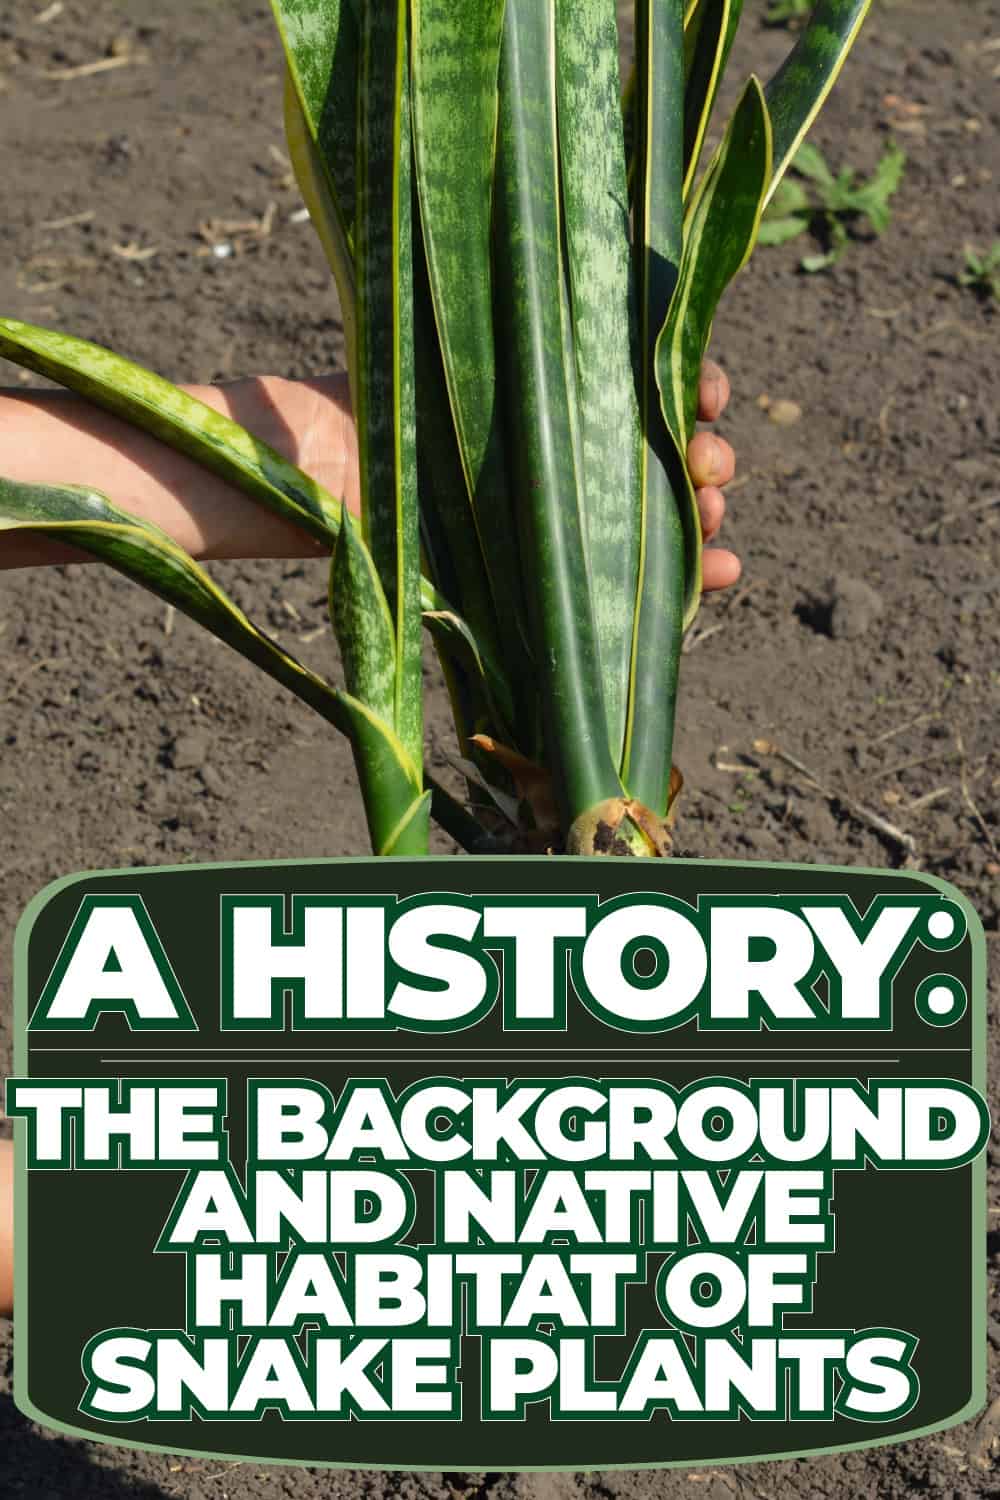 A History: The Background And Native Habitat Of Snake Plants